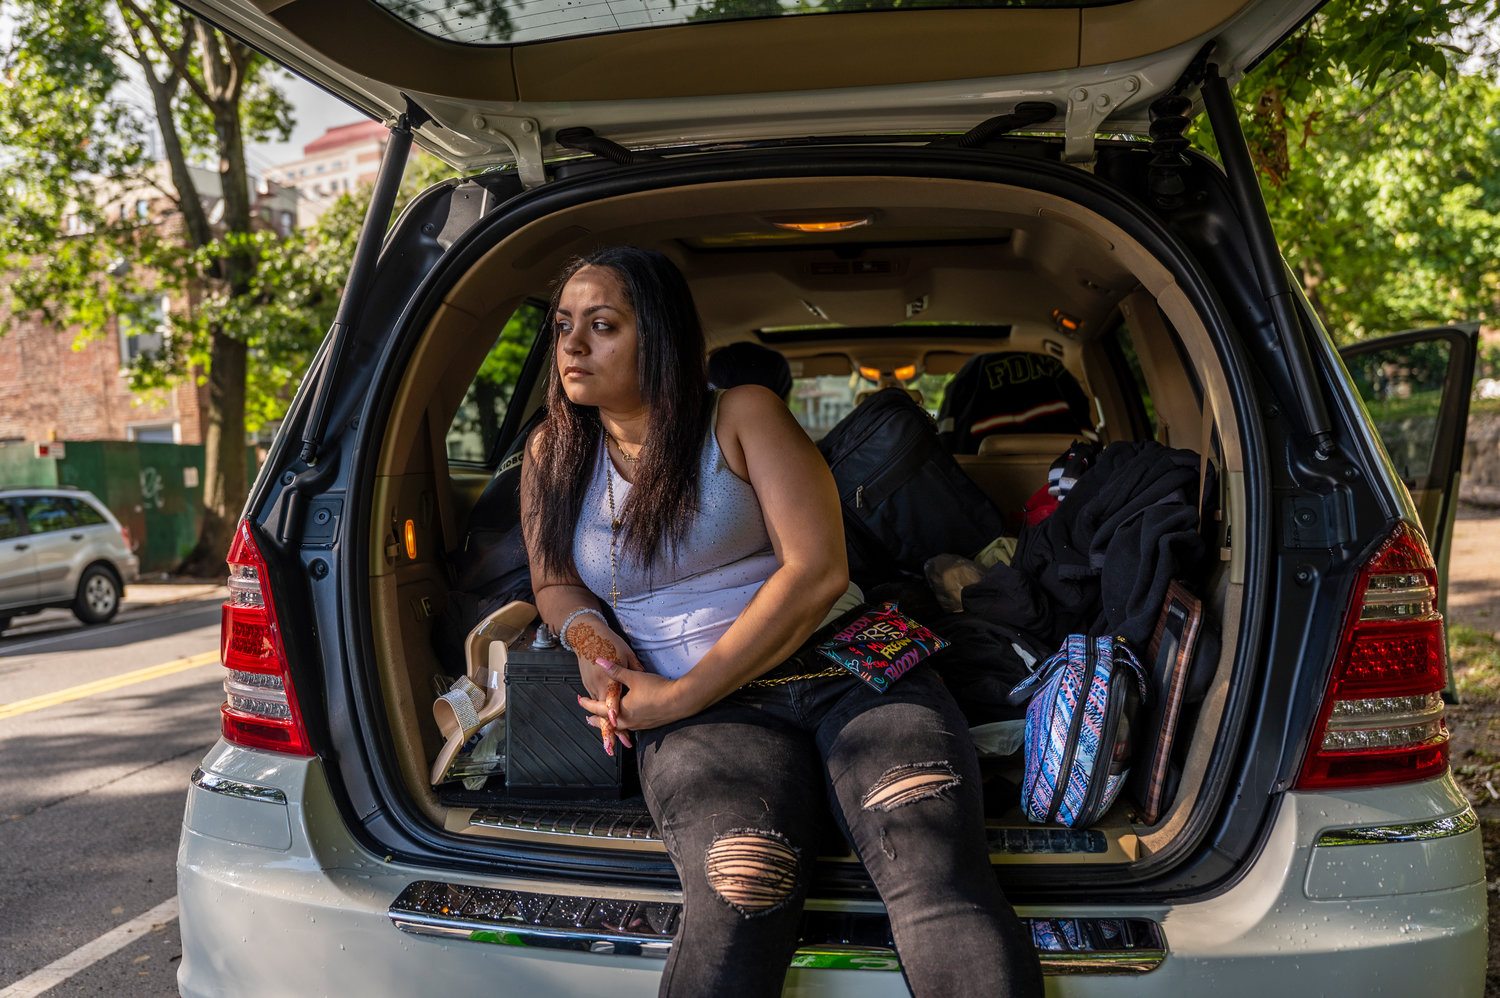 Jennifer Medina sits at the rear of her car where she keeps some of the things that belong to her and her son. Medina’s family is at risk of being evicted from their home if state lawmakers fail to extend the existing pandemic-related moratorium that’s right now preventing it.